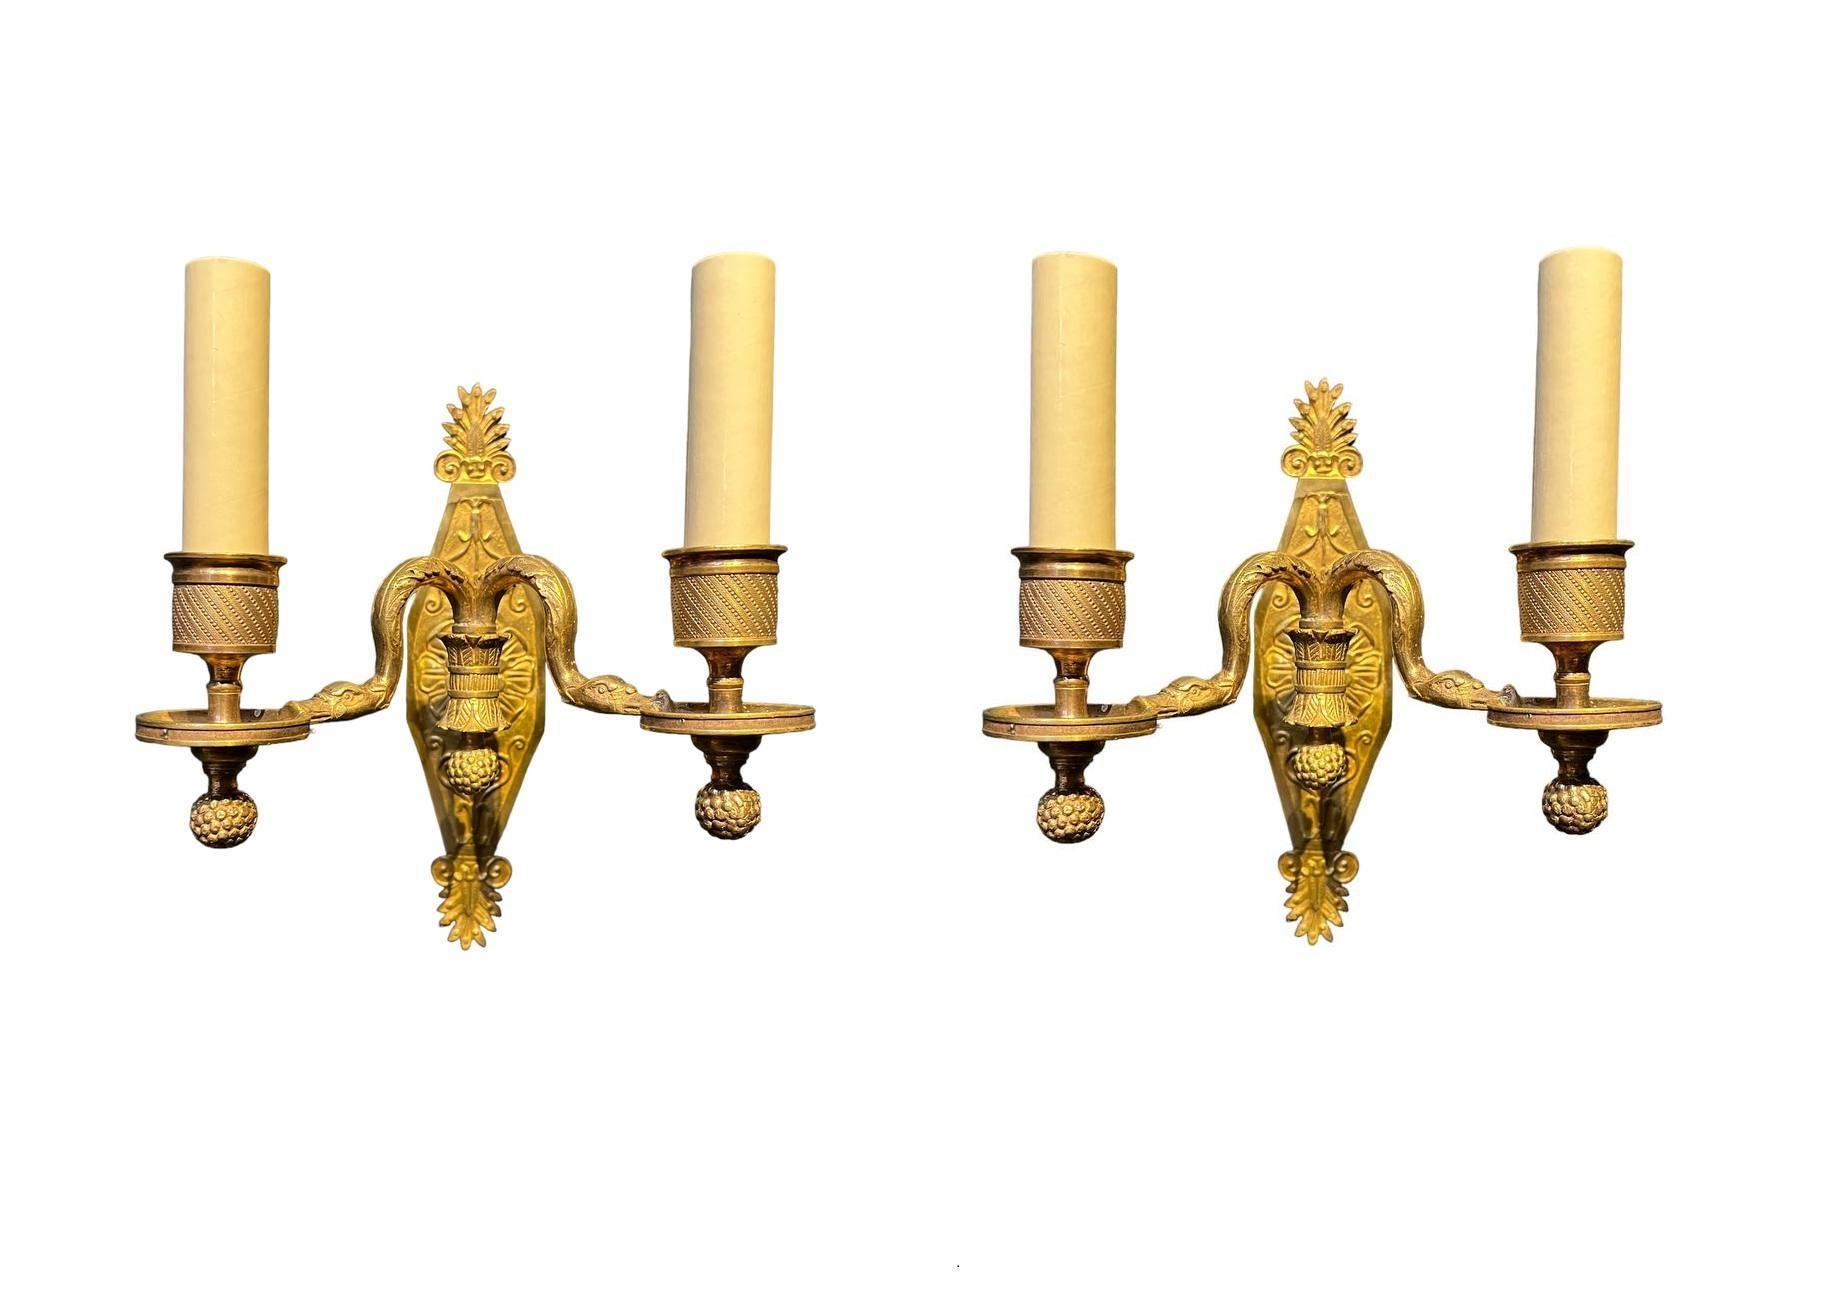 A pair of circa 1900 French Empire sconces with swan's head